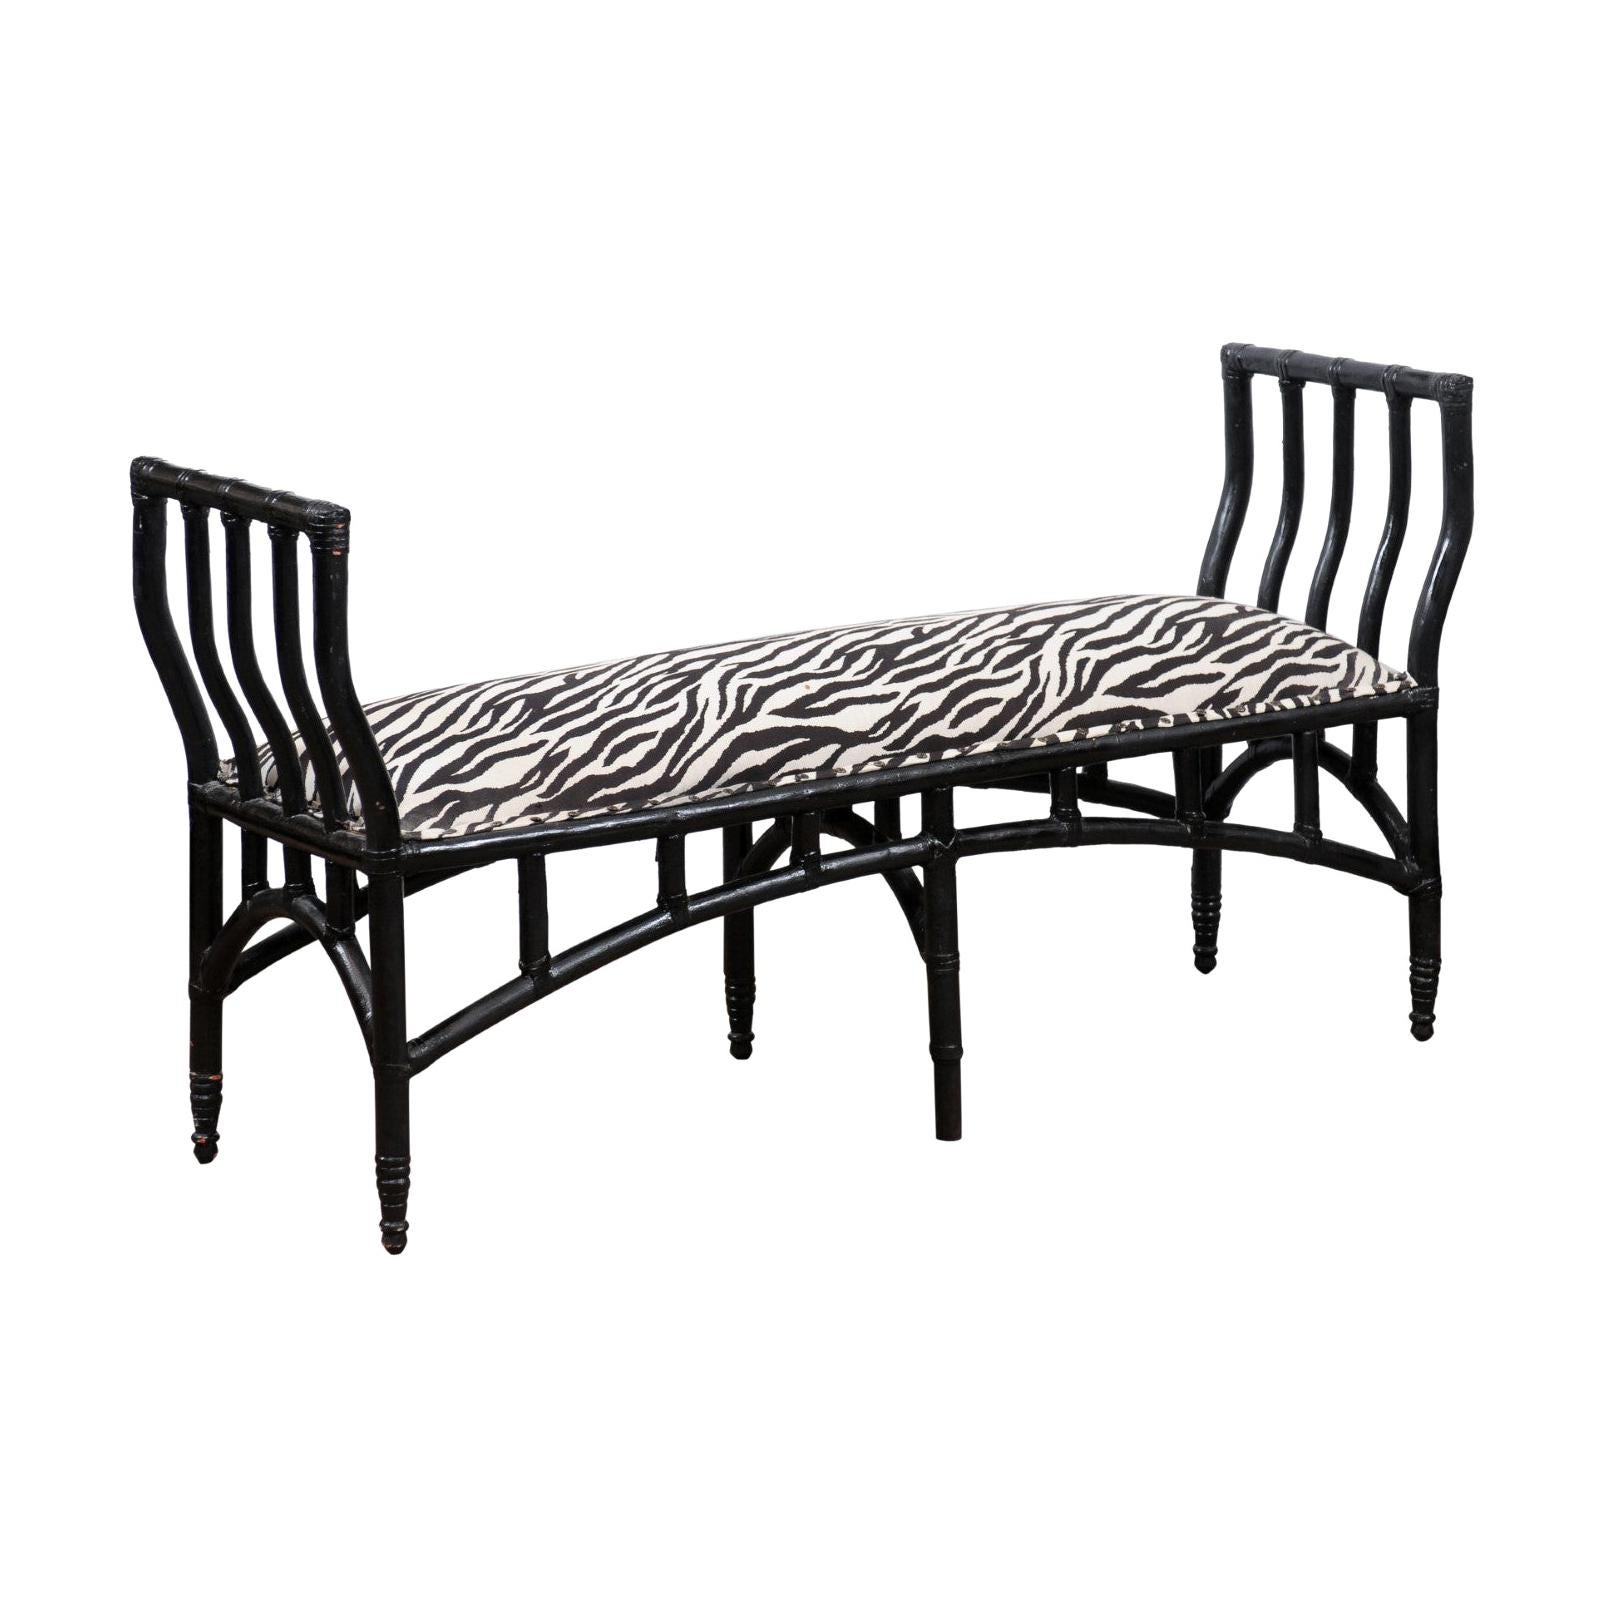 English Long Black Painted Faux Bamboo Bench, 20th Century For Sale